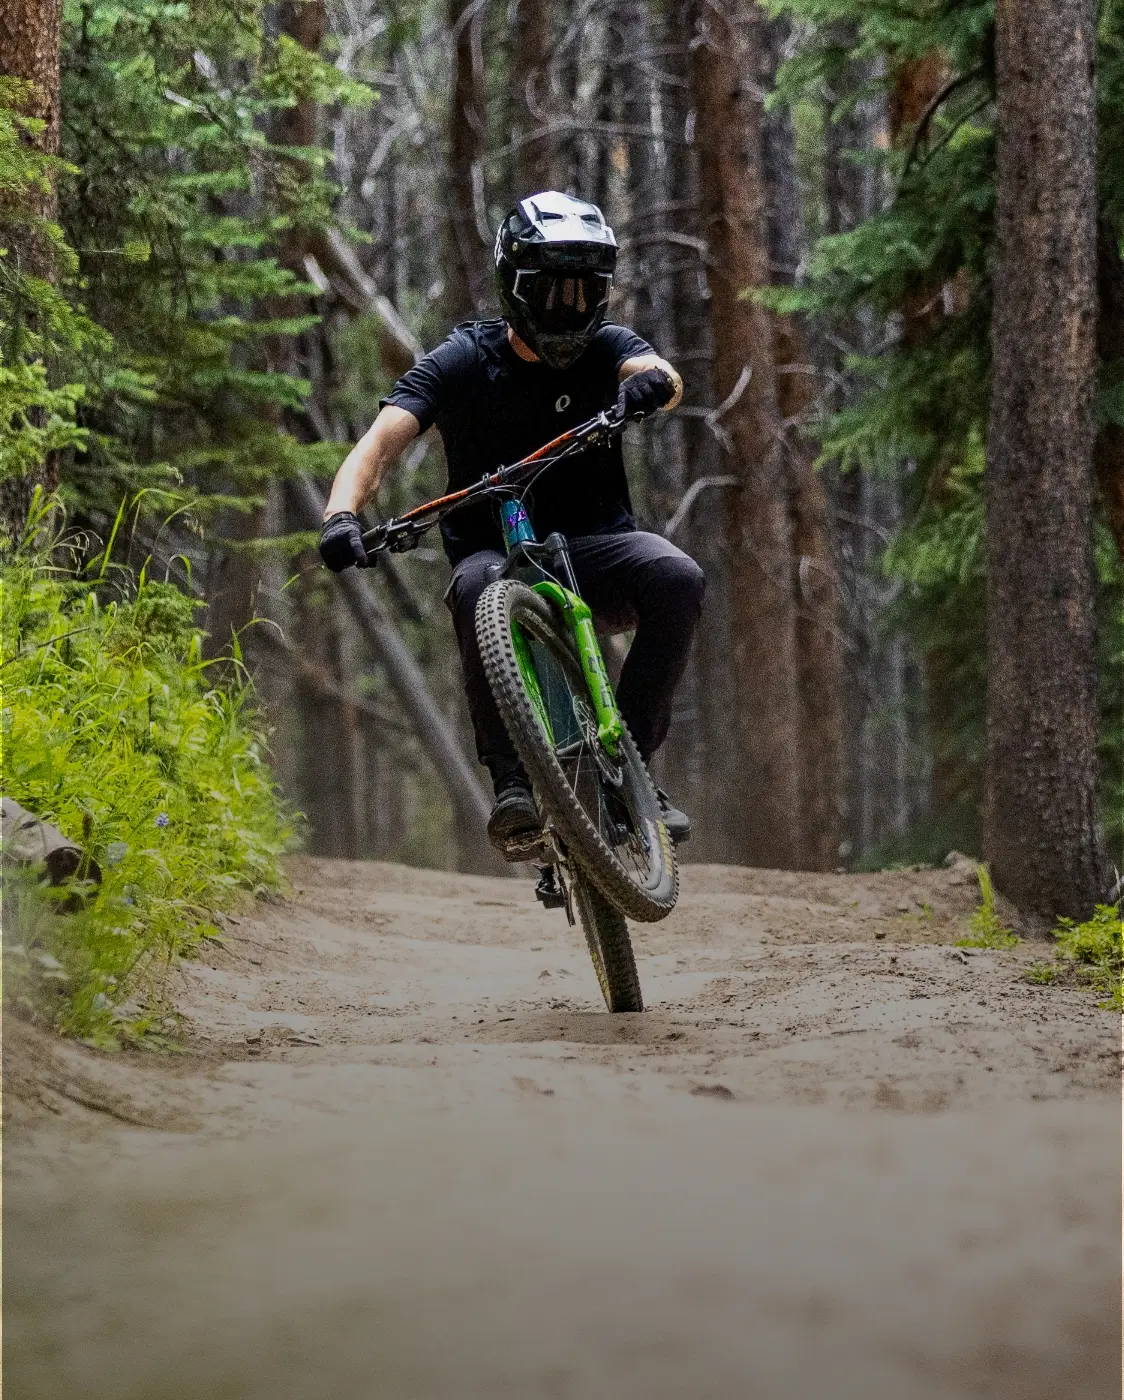 Mountain biker coming down a dirt trail and doing a wheelie while wearing a PEARL iZUMi MTB jersey